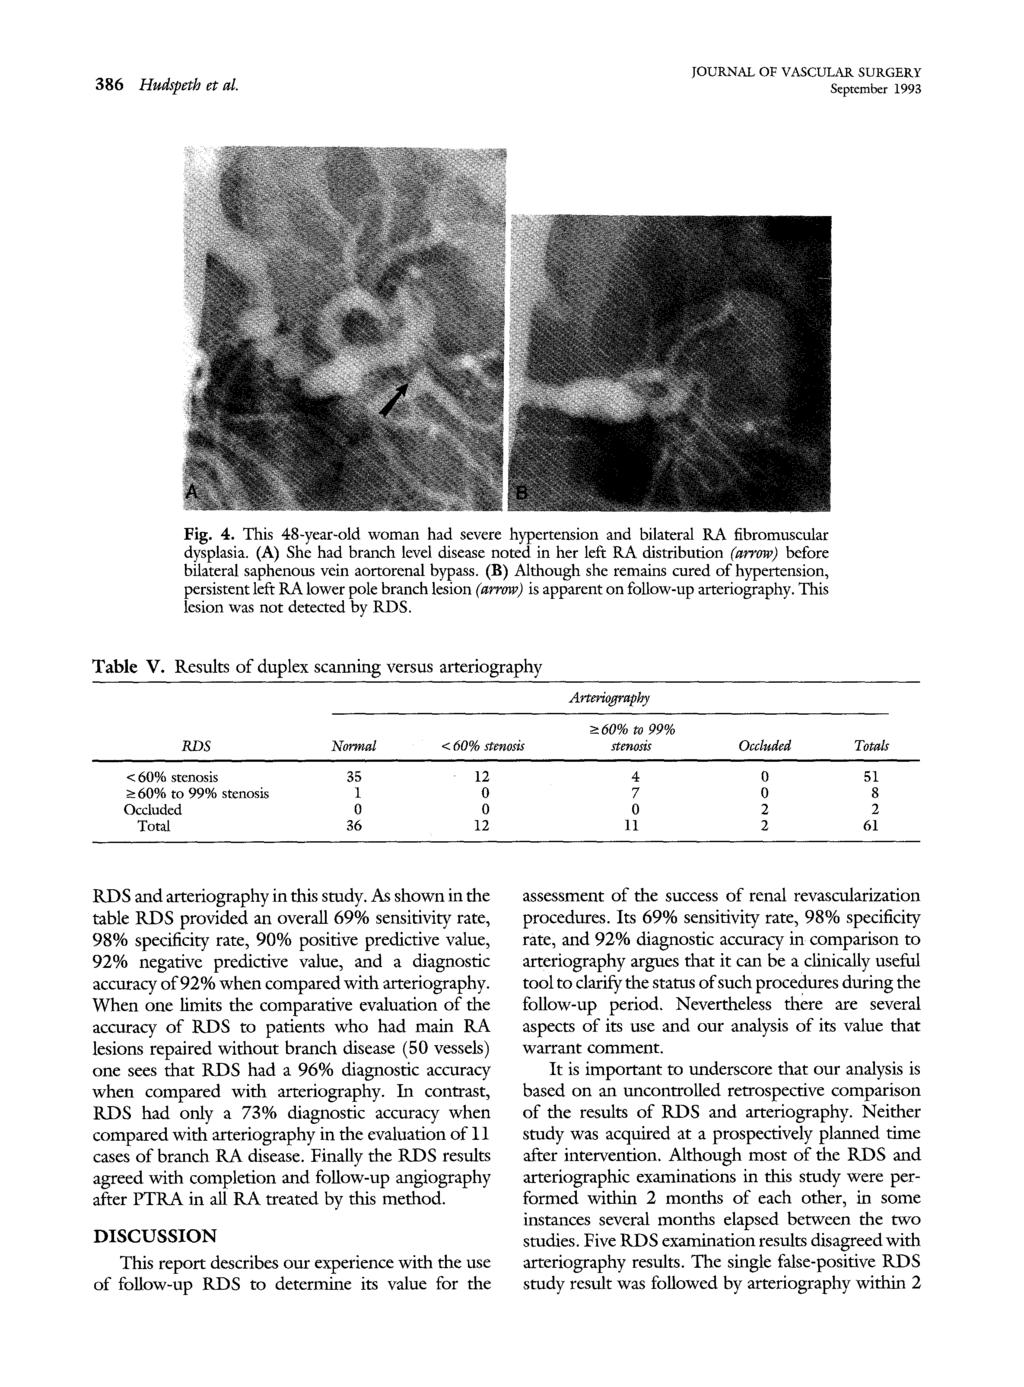 386 Hudspeth et al. September 1993 Fig. 4. This 48-year-old woman had severe hypertension and bilateral RA fibromuscular dysplasia.